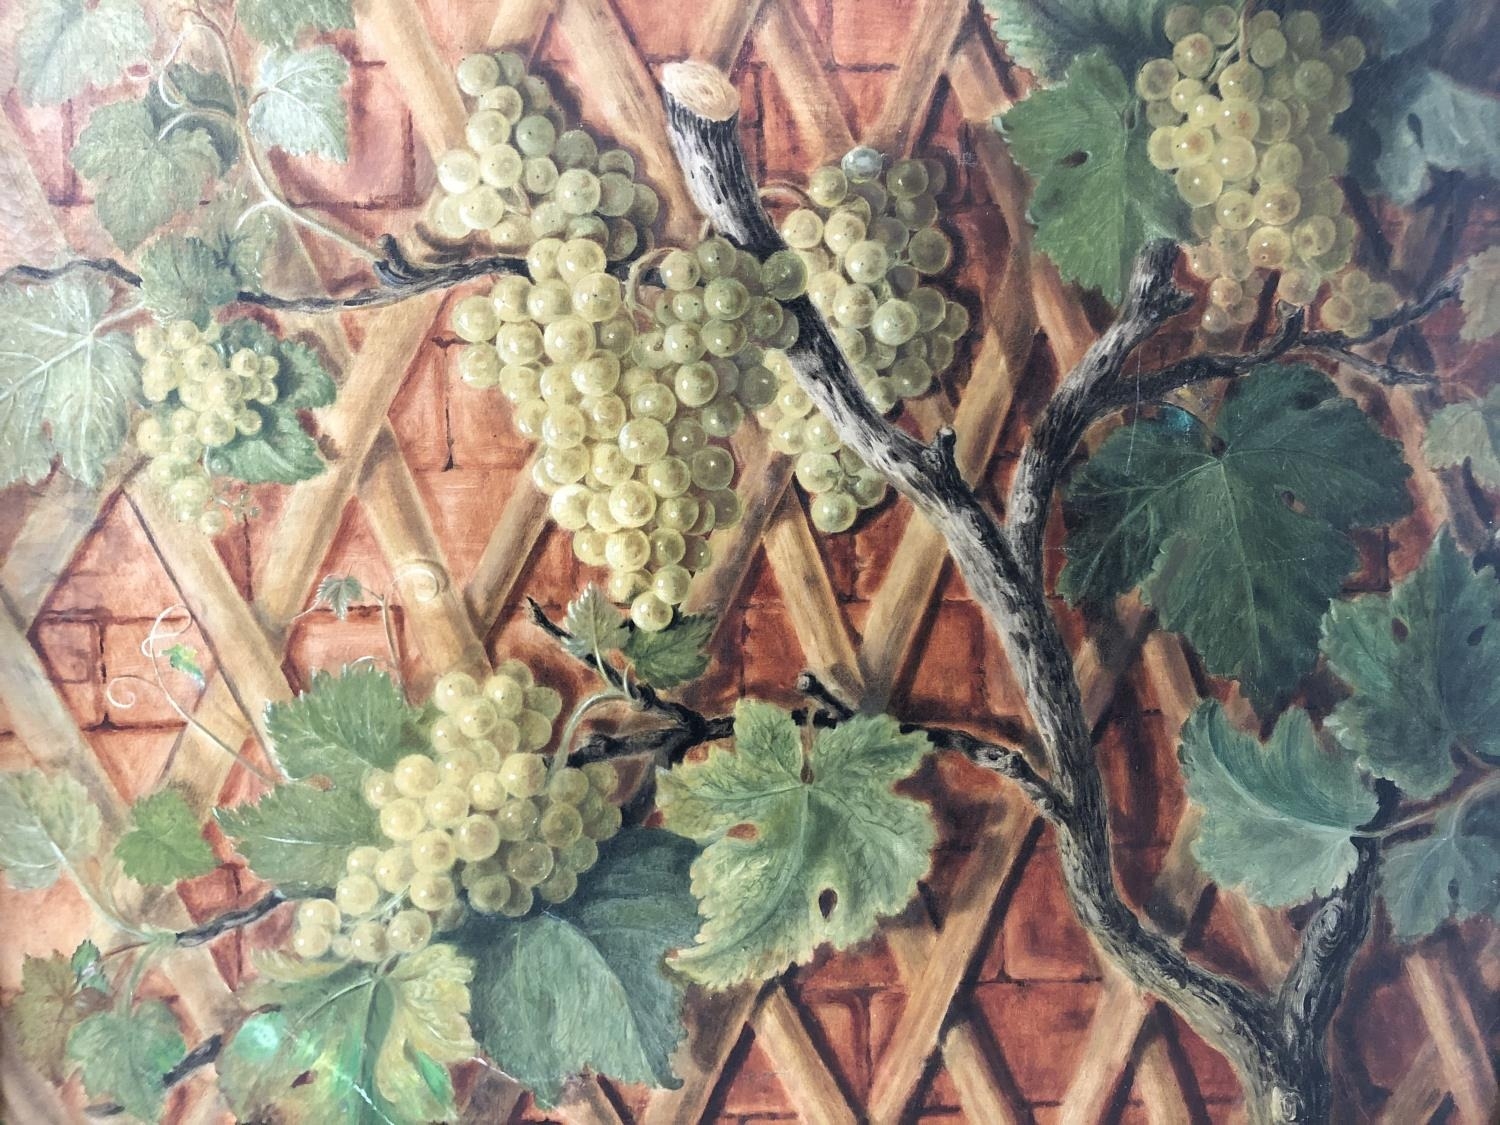 Early 20th Century - Grapes on the vine, indistinctly signed 'Helene Nisa...?' lower left, oil on - Image 2 of 4